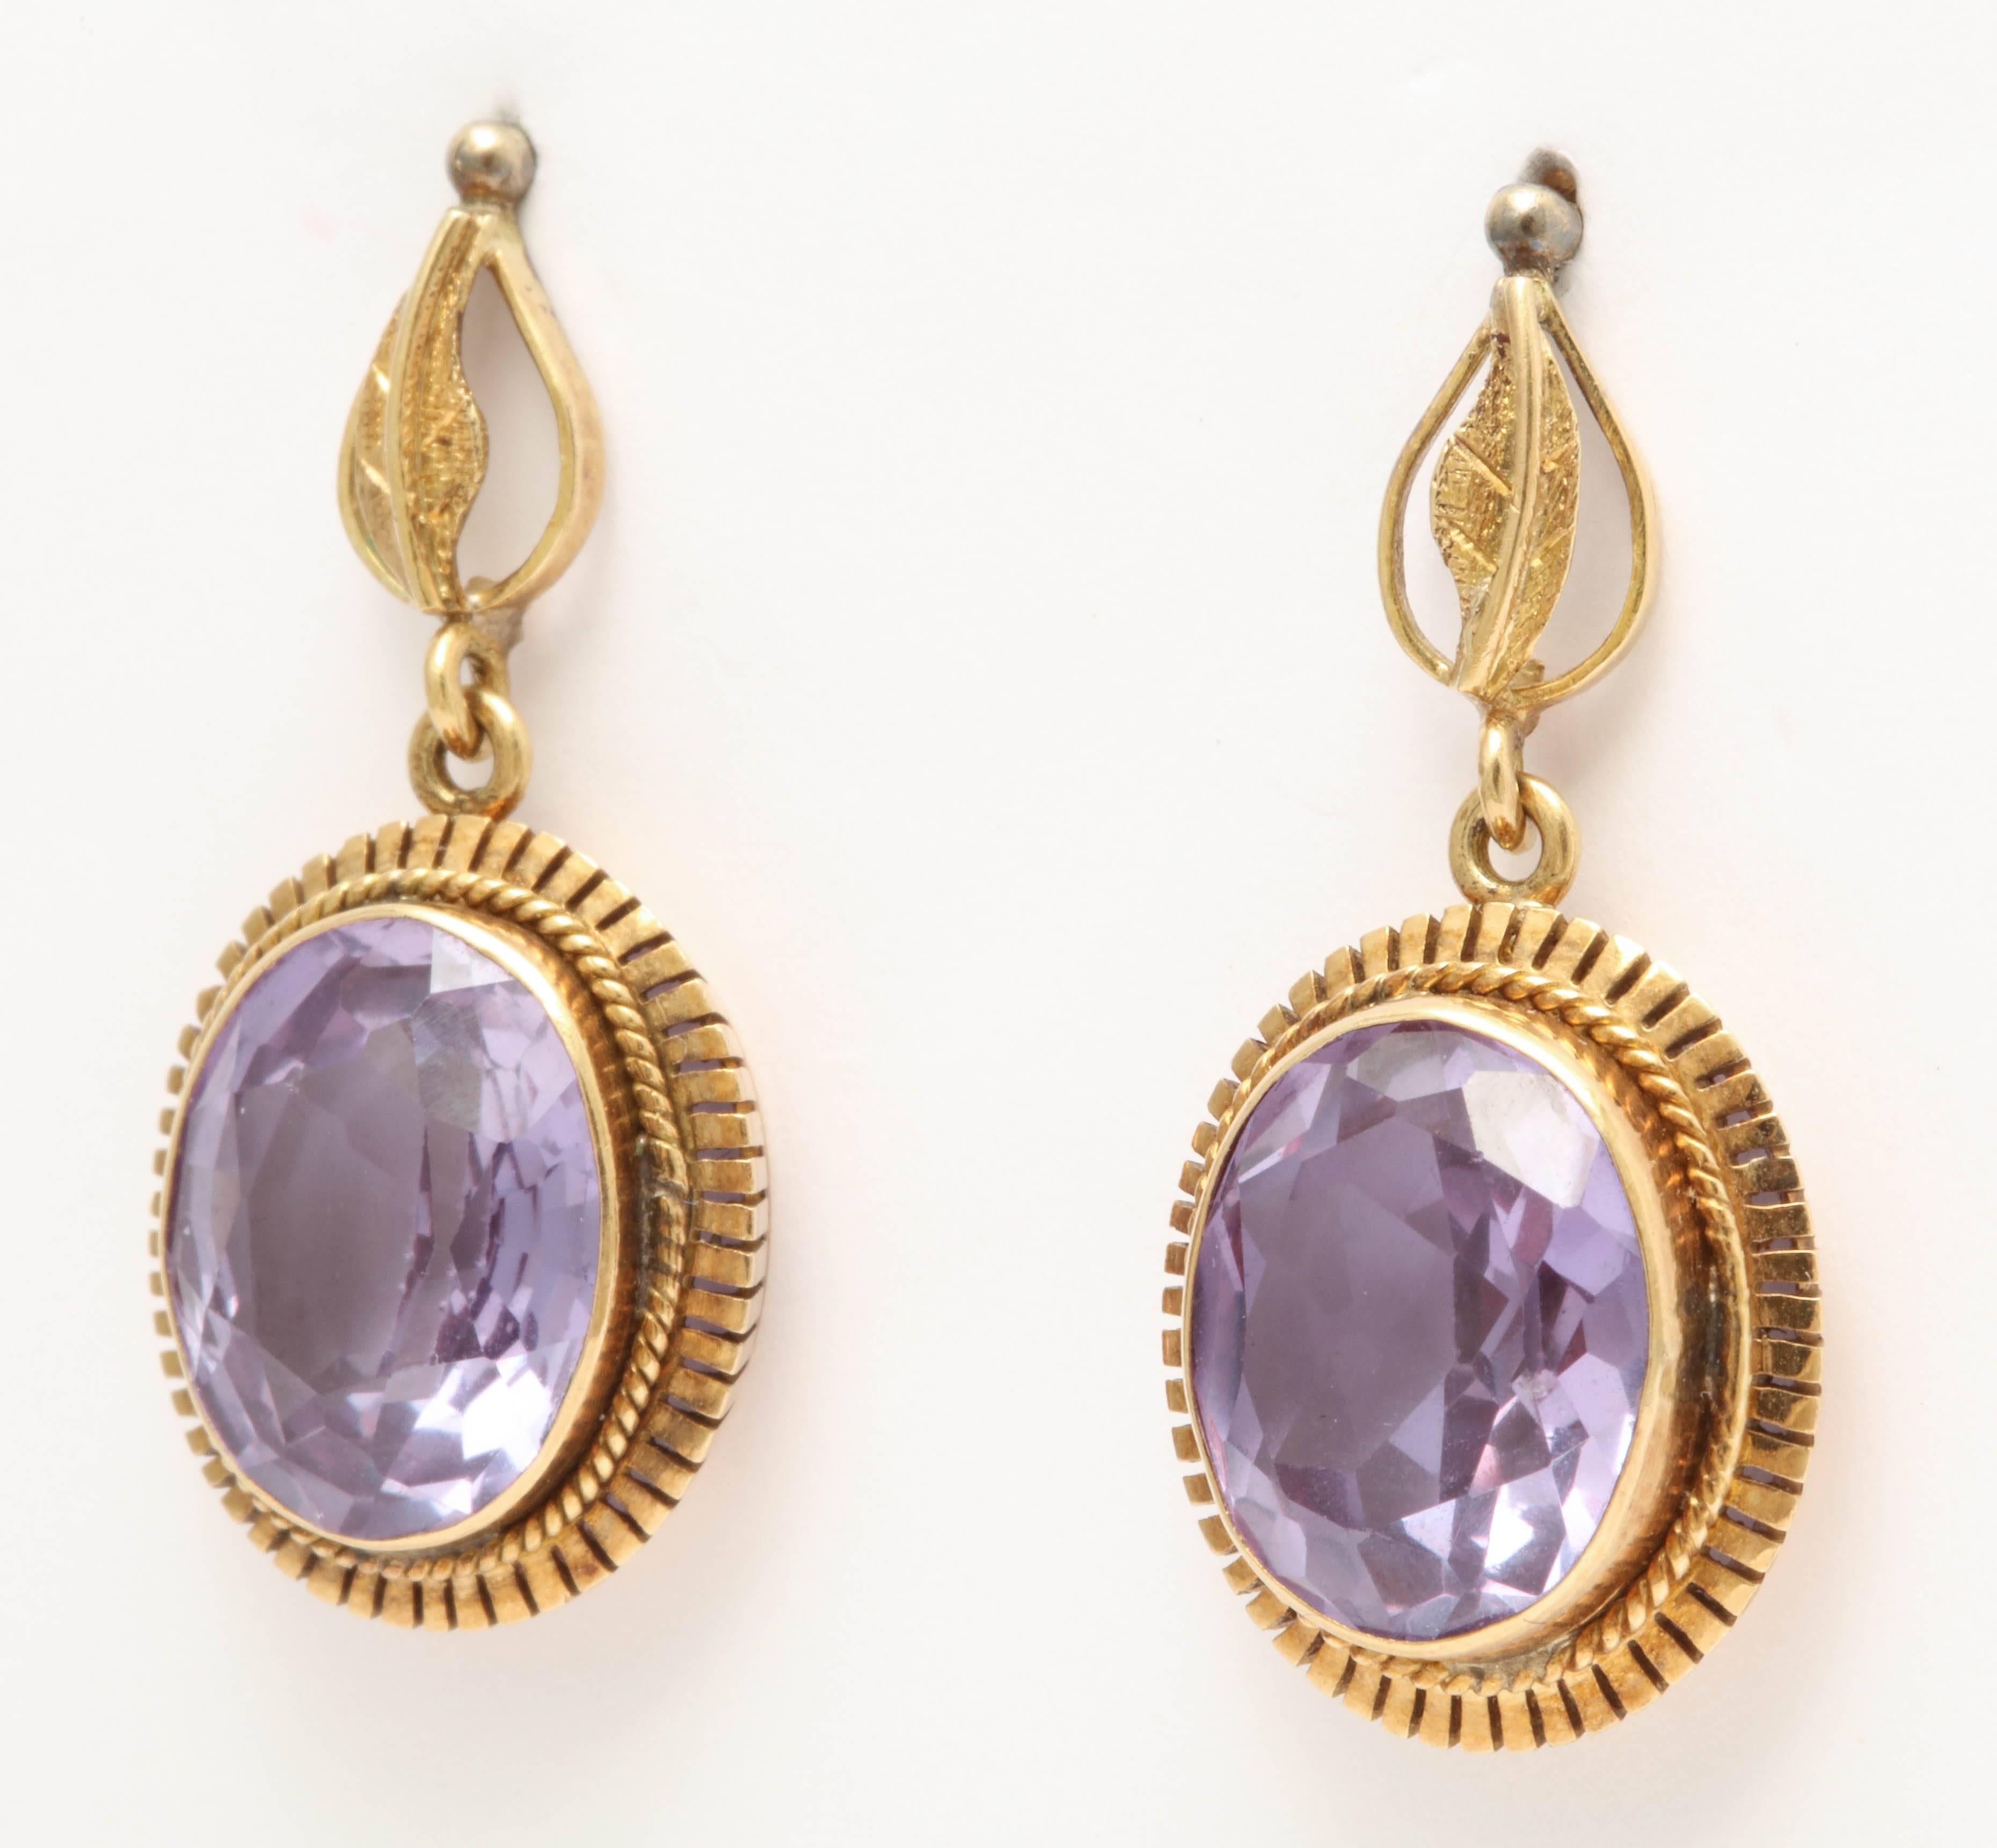 Large purple faceted sapphires are set in 18k yellow gold and dangle from a leaf designed top. Made in the 1930's, these sapphires are synthetic. The creation of synthetic sapphires is a popular and long known process starting in the 1870s. One of